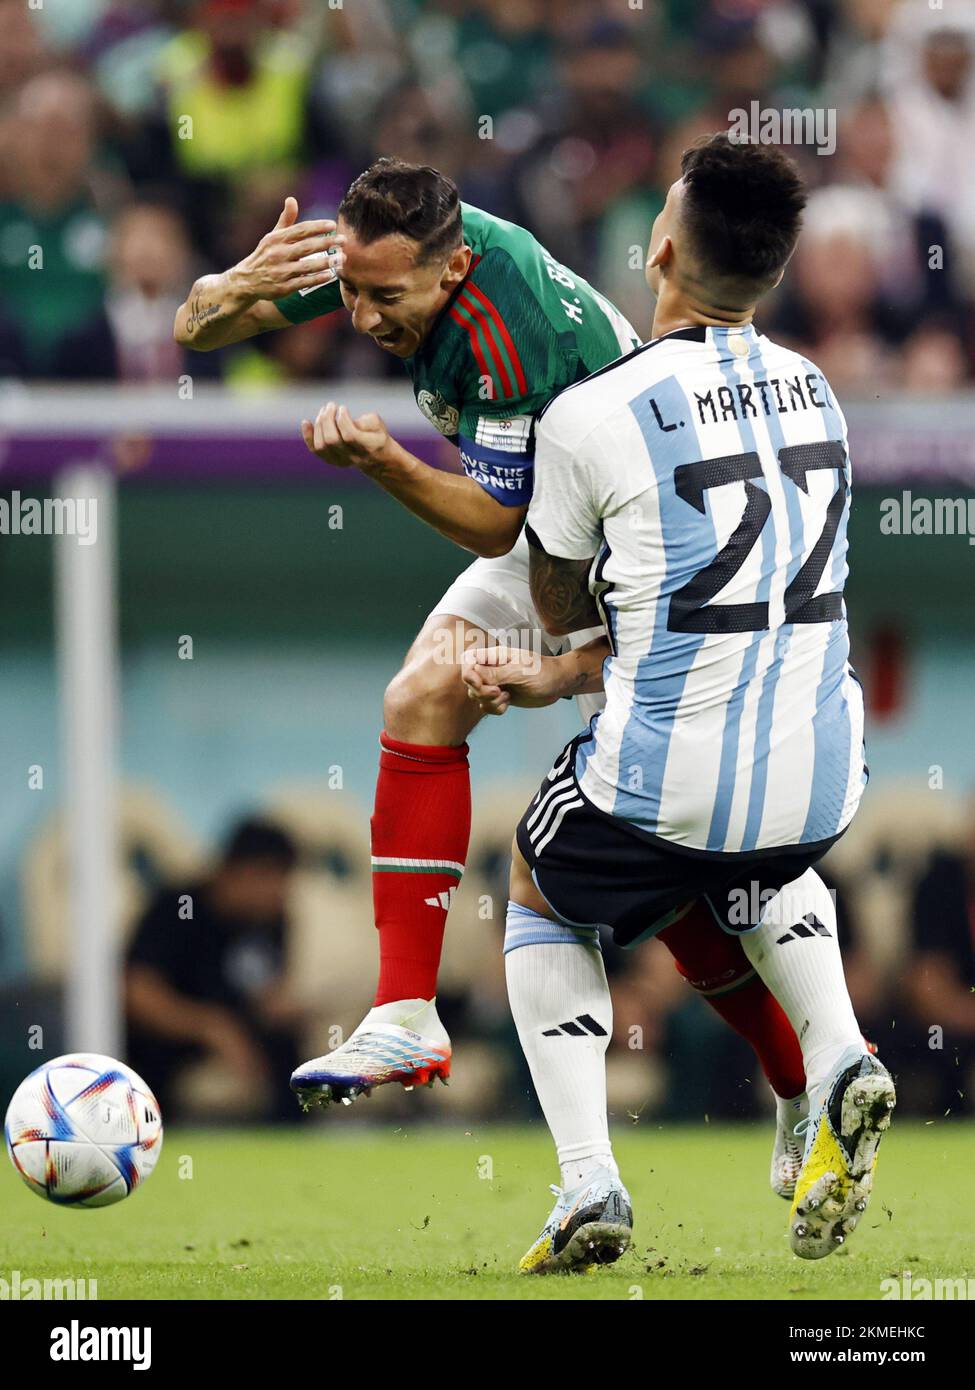 LUSAIL CITY - (l-r) Andres Guardado of Mexico, Lautaro Martinez of Argentina during the FIFA World Cup Qatar 2022 group C match between Argentina and Mexico at Lusail Stadium on November 26, 2022 in Lusail City, Qatar. AP | Dutch Height | MAURICE OF STONE Stock Photo